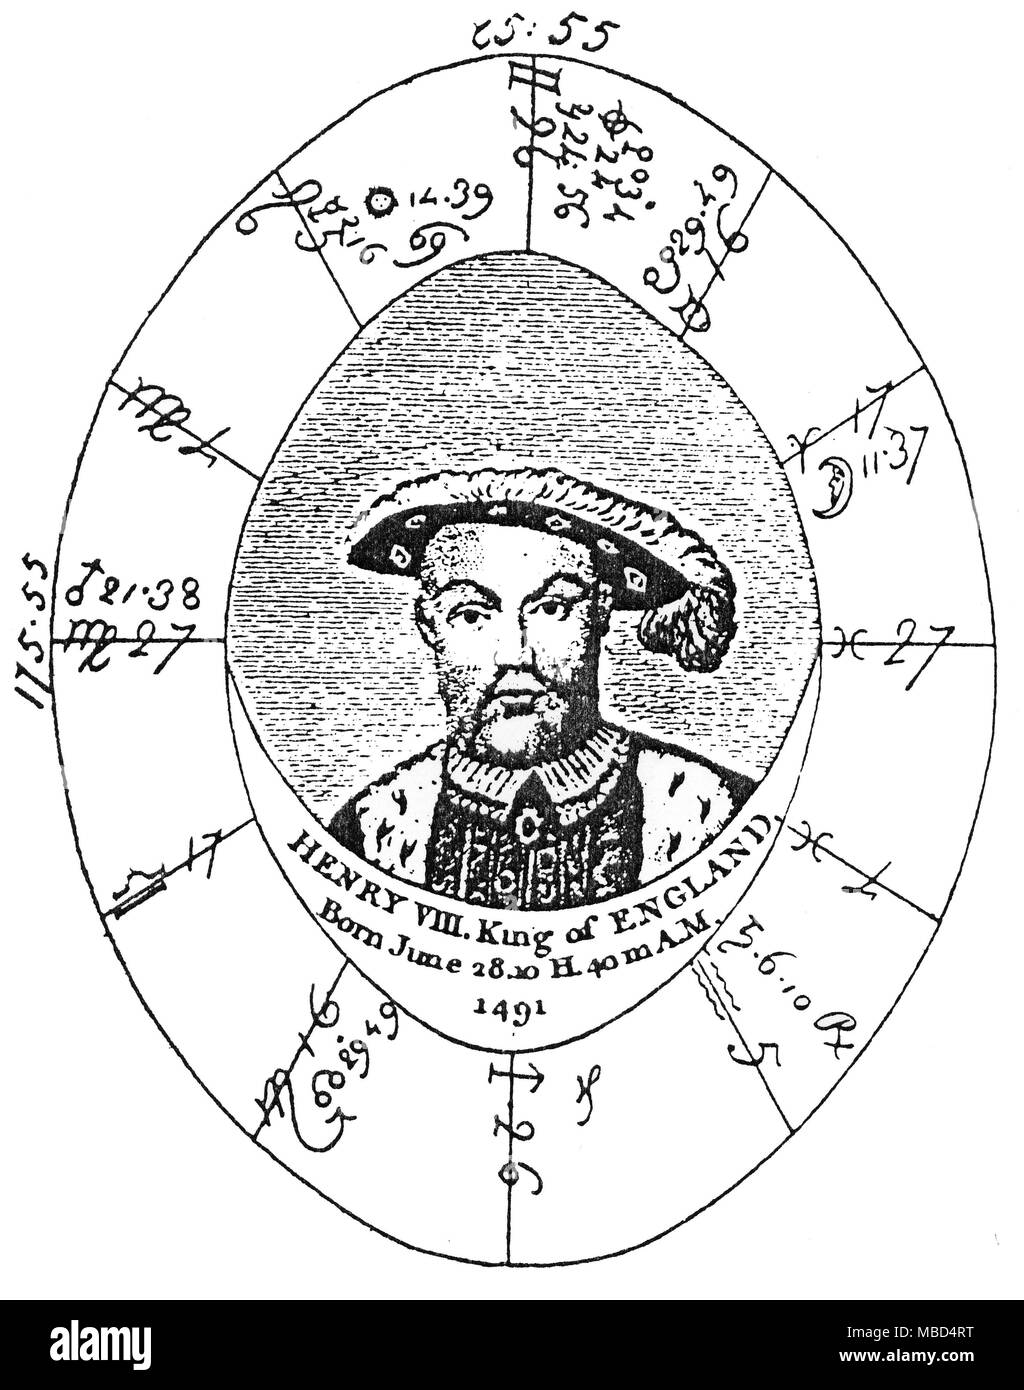 HOROSCOPES - HENRY VIII, KING OF ENGLAND Henry was born on 28 June 1491, in London. According to this chart, cast by the English Mason and astrologer, Ebenezer Sibly, A New and Complete Illustration of the Occult Sciences (1790), Henry was born at 10:40 am. Stock Photo